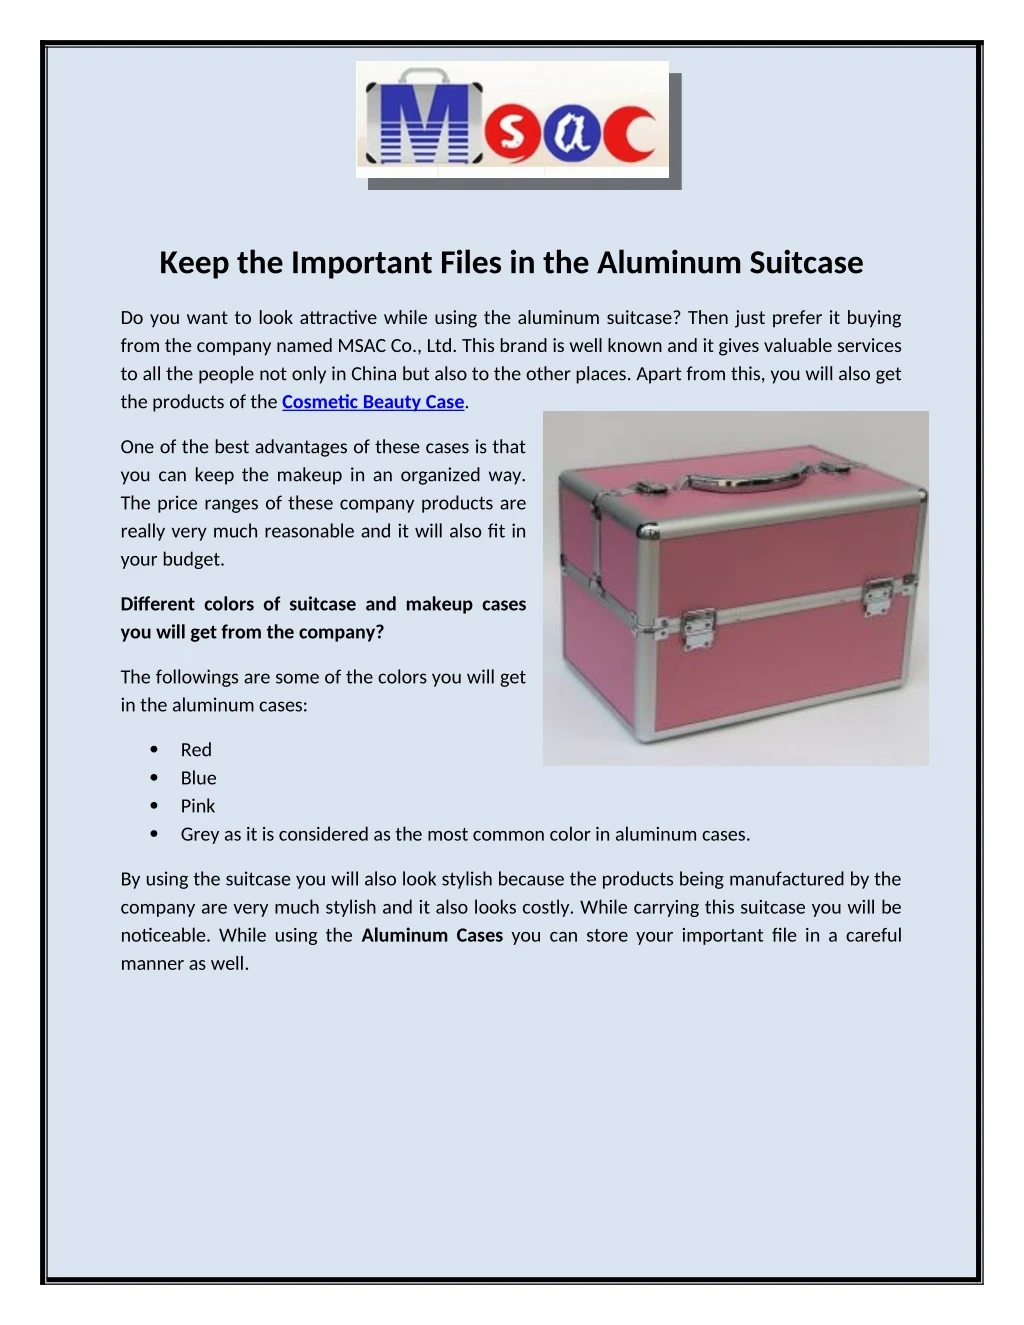 keep the important files in the aluminum suitcase